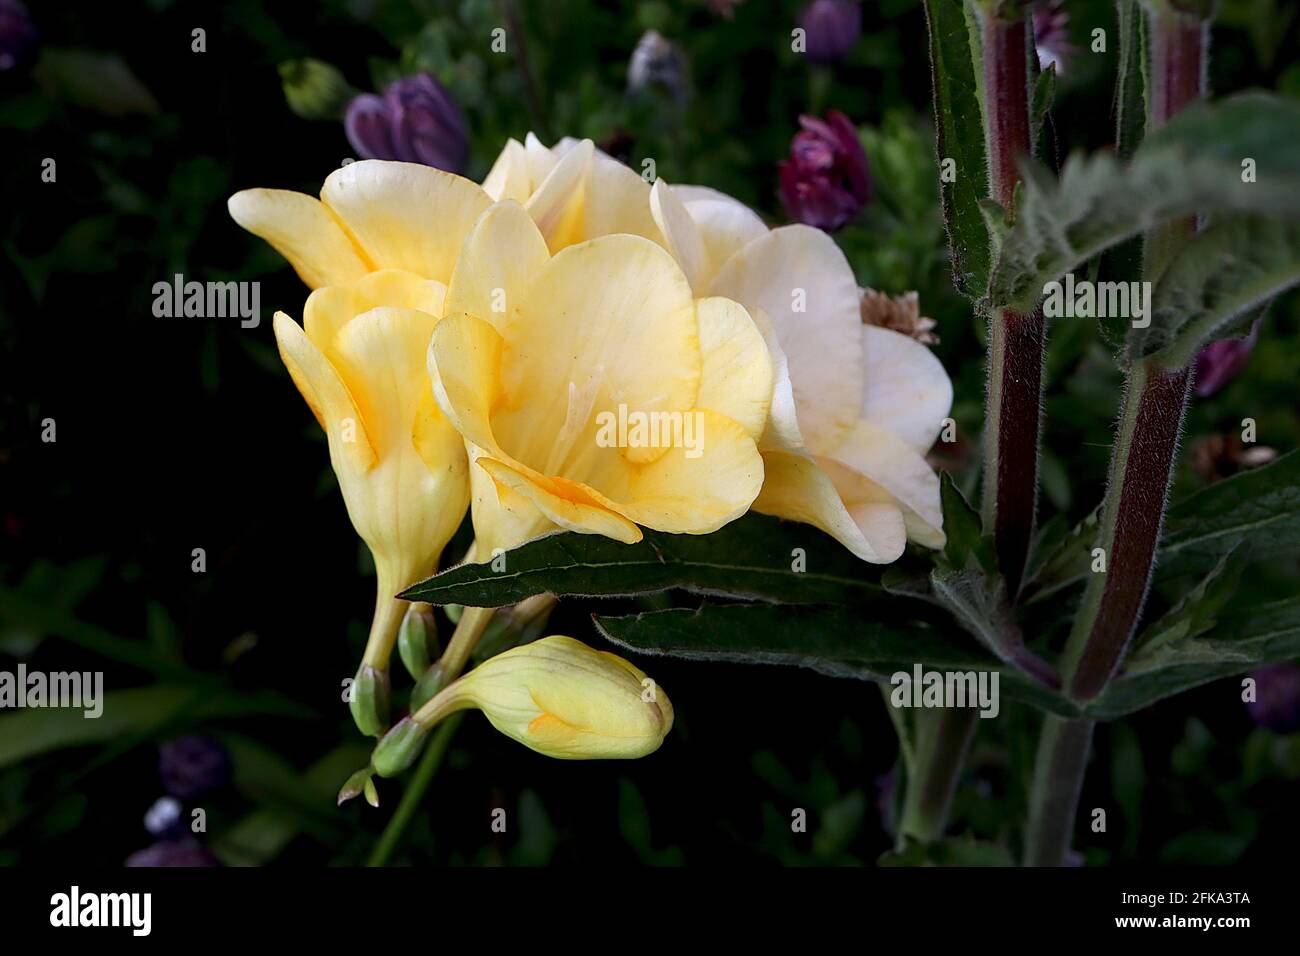 Freesia x kewensis White and Yellow Highly scented white and yellow funnel-shaped flowers,  April, England, UK Stock Photo